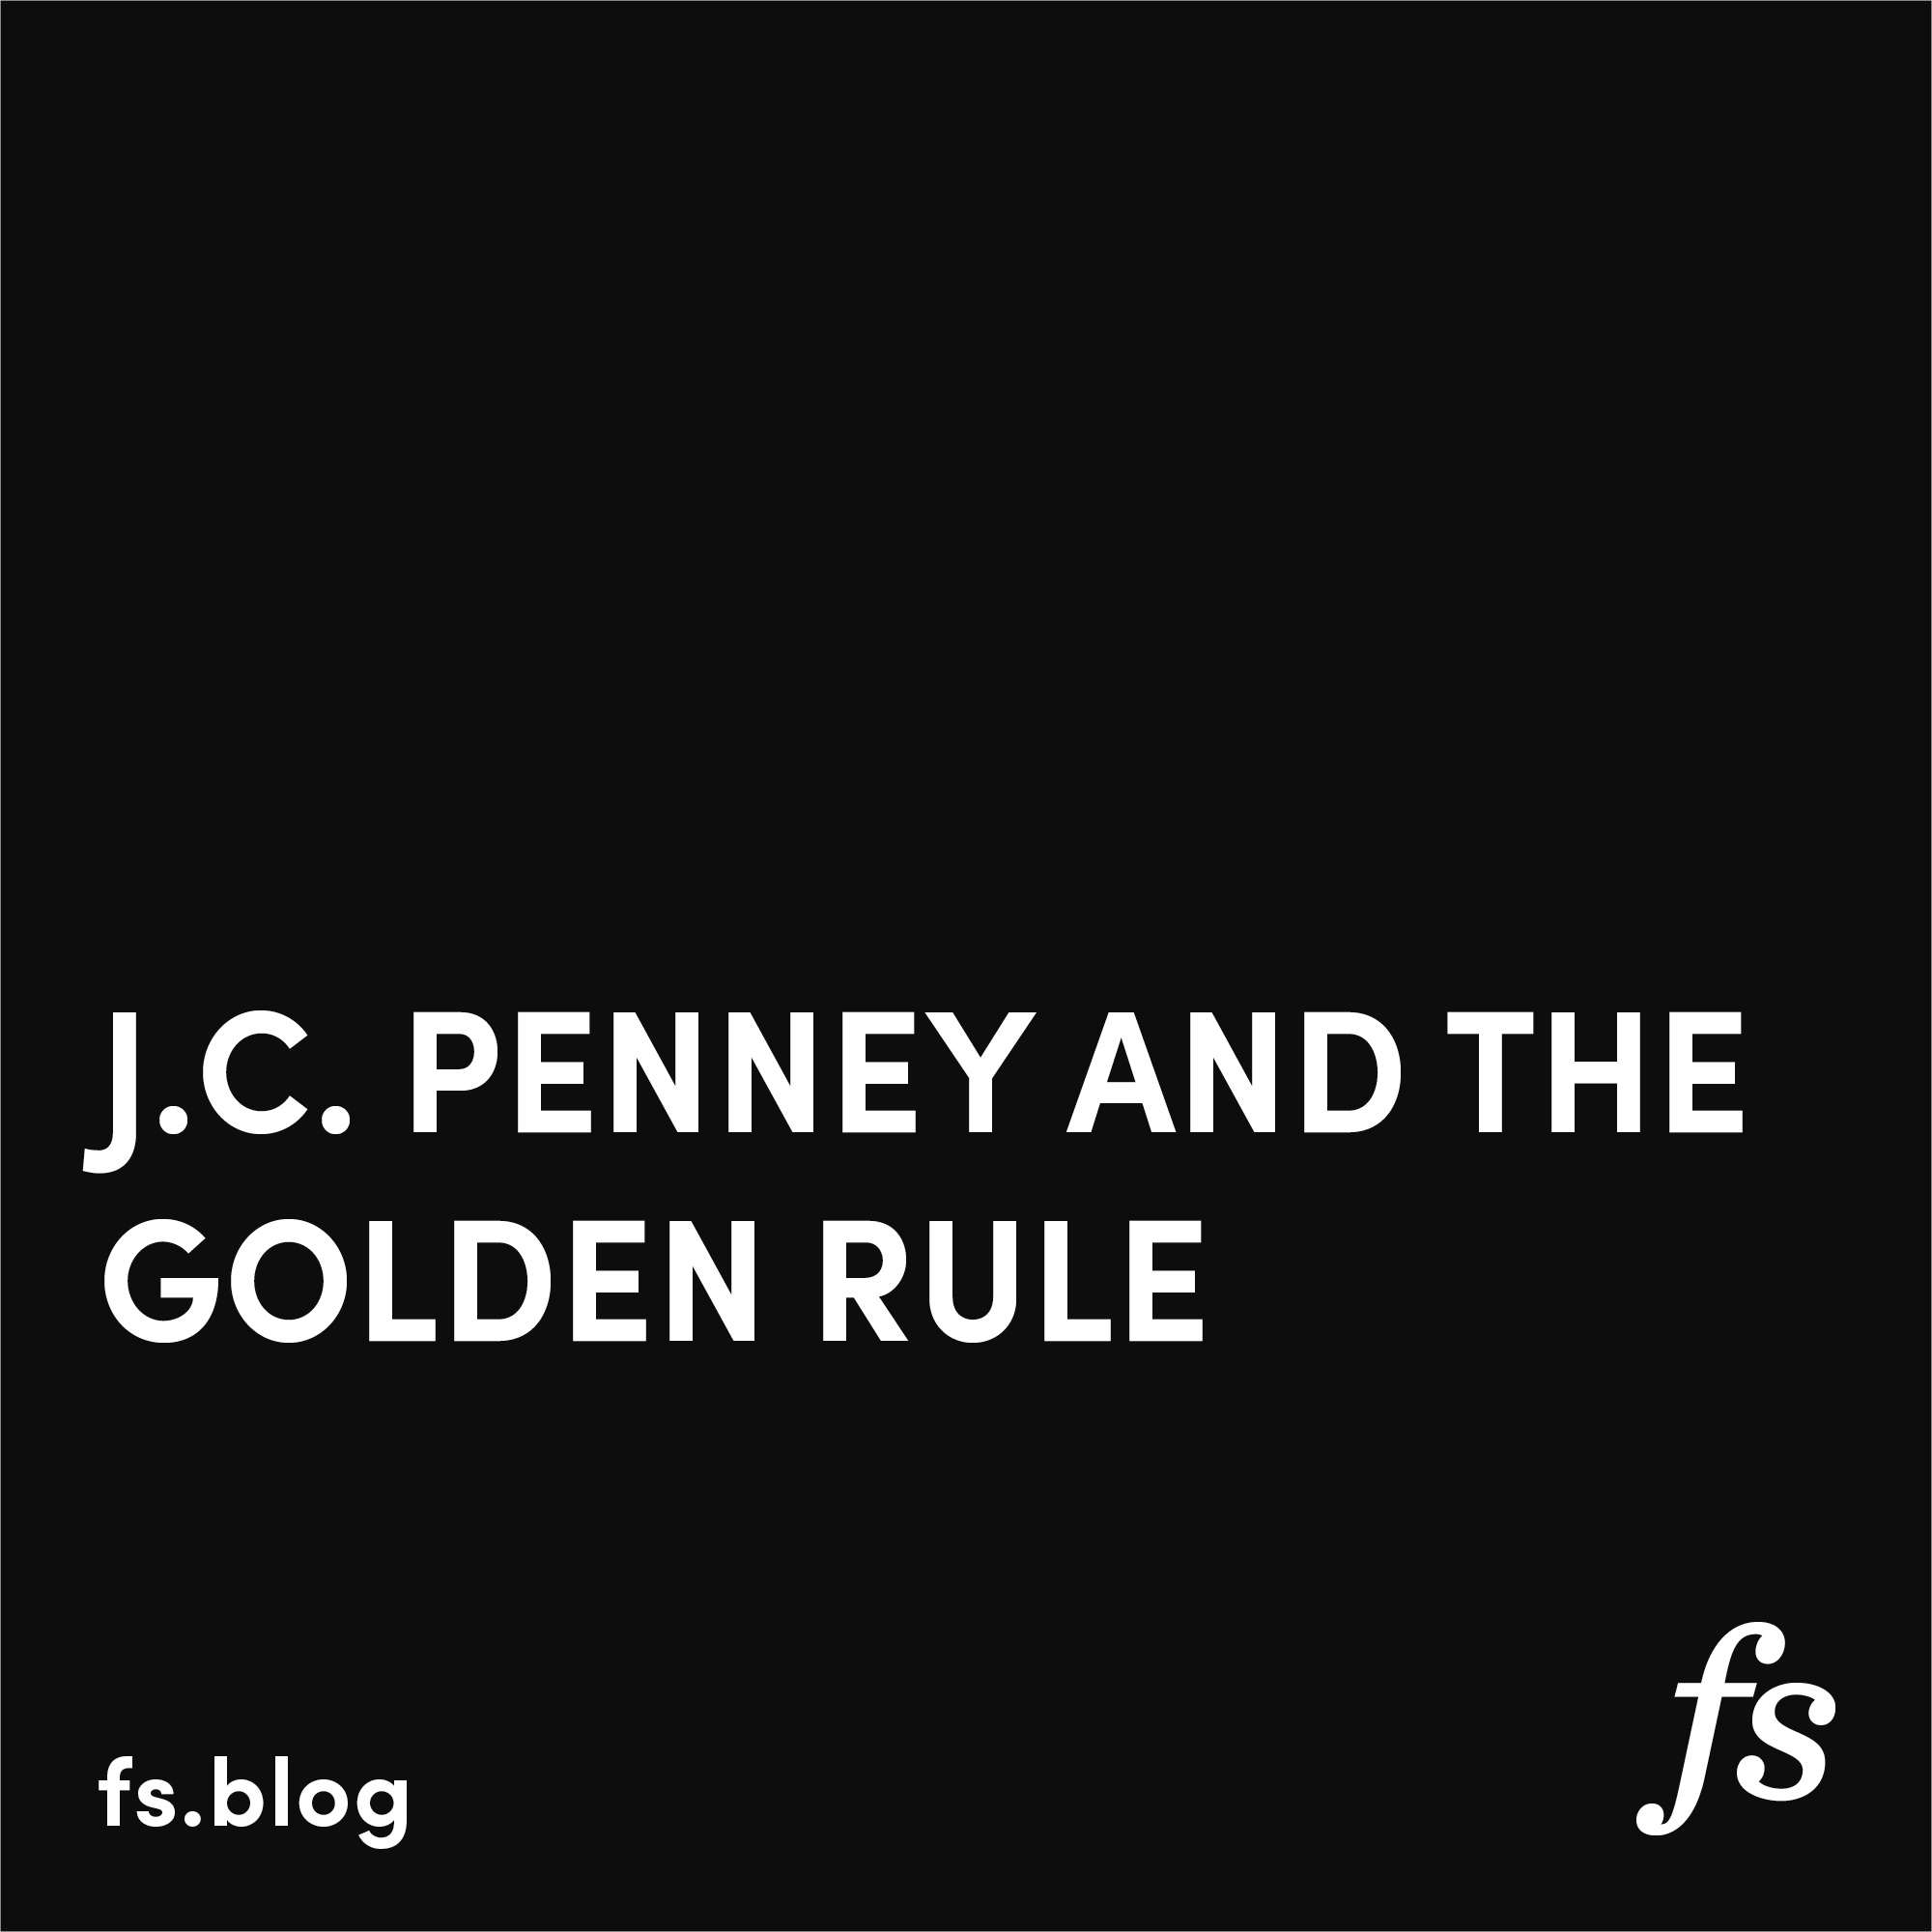 James Cash Penney: From Clerk to Chain-store Tycoon